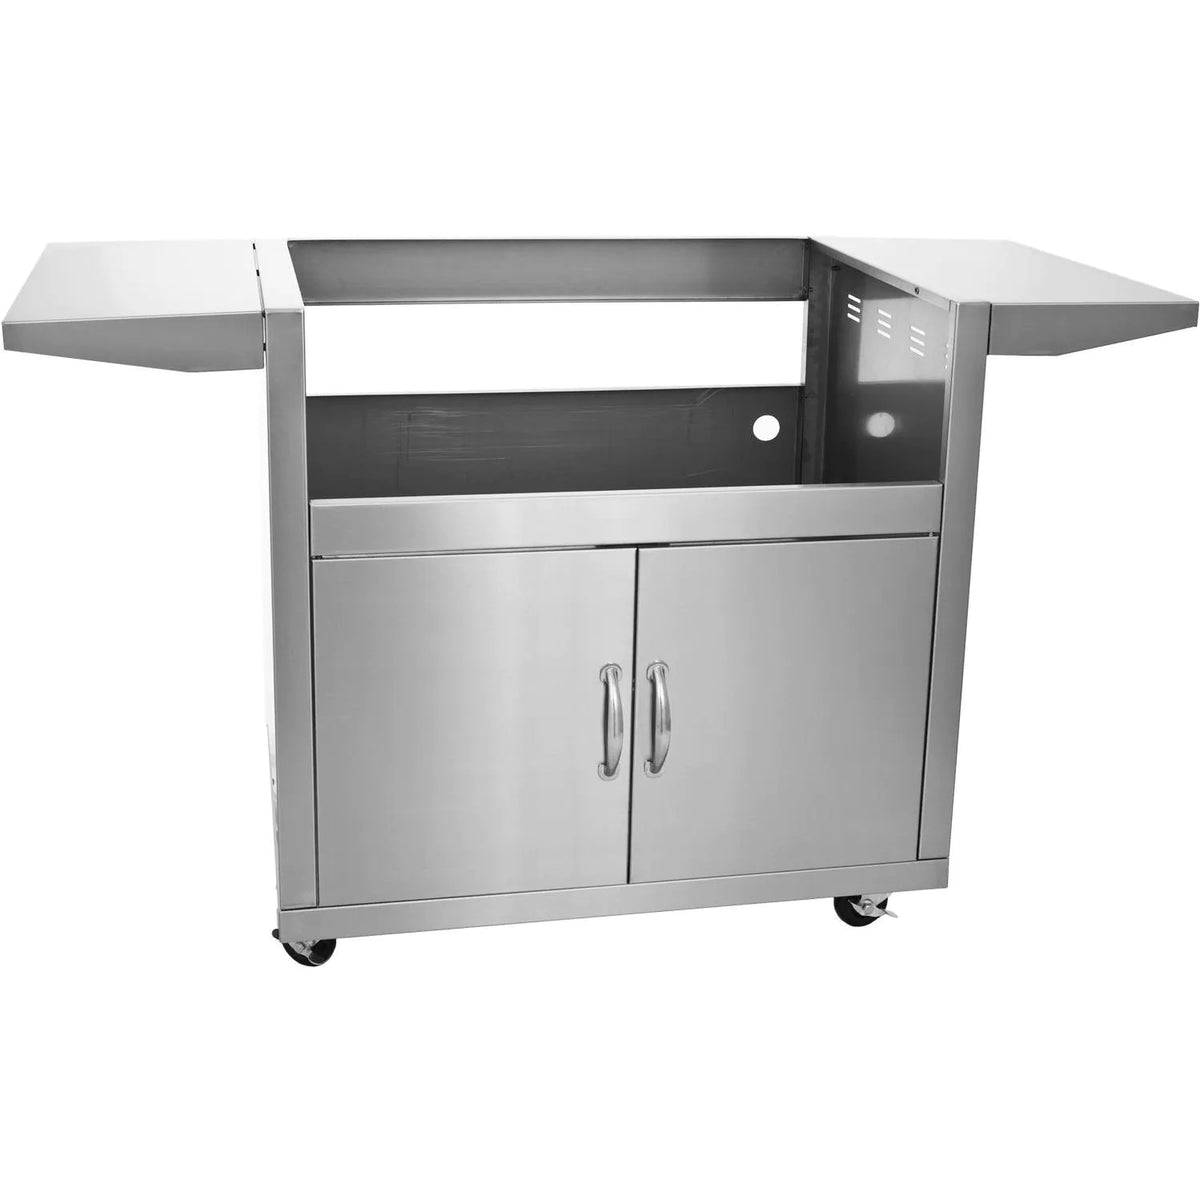 Blaze 4 Burner 32 Inch Grill Cart Side Angle View